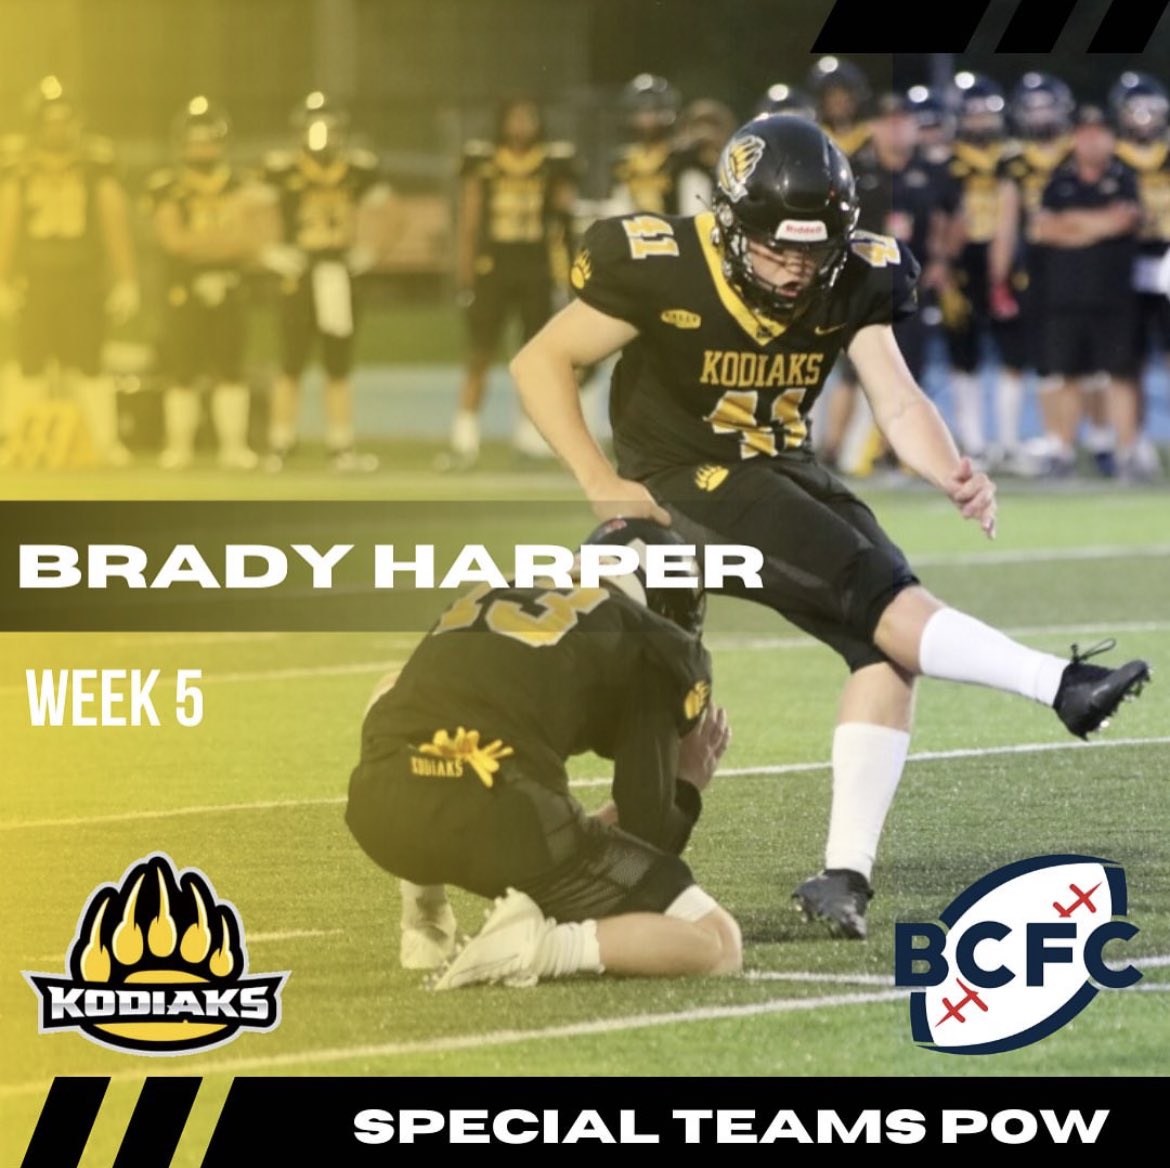 Back to back weeks, Brady Harper earns himself Special Teams Player of the Week honours. The Fort McMurray, AB product remains perfect on the year after going three for three on FG attempts, including the game-winner, and added a convert.